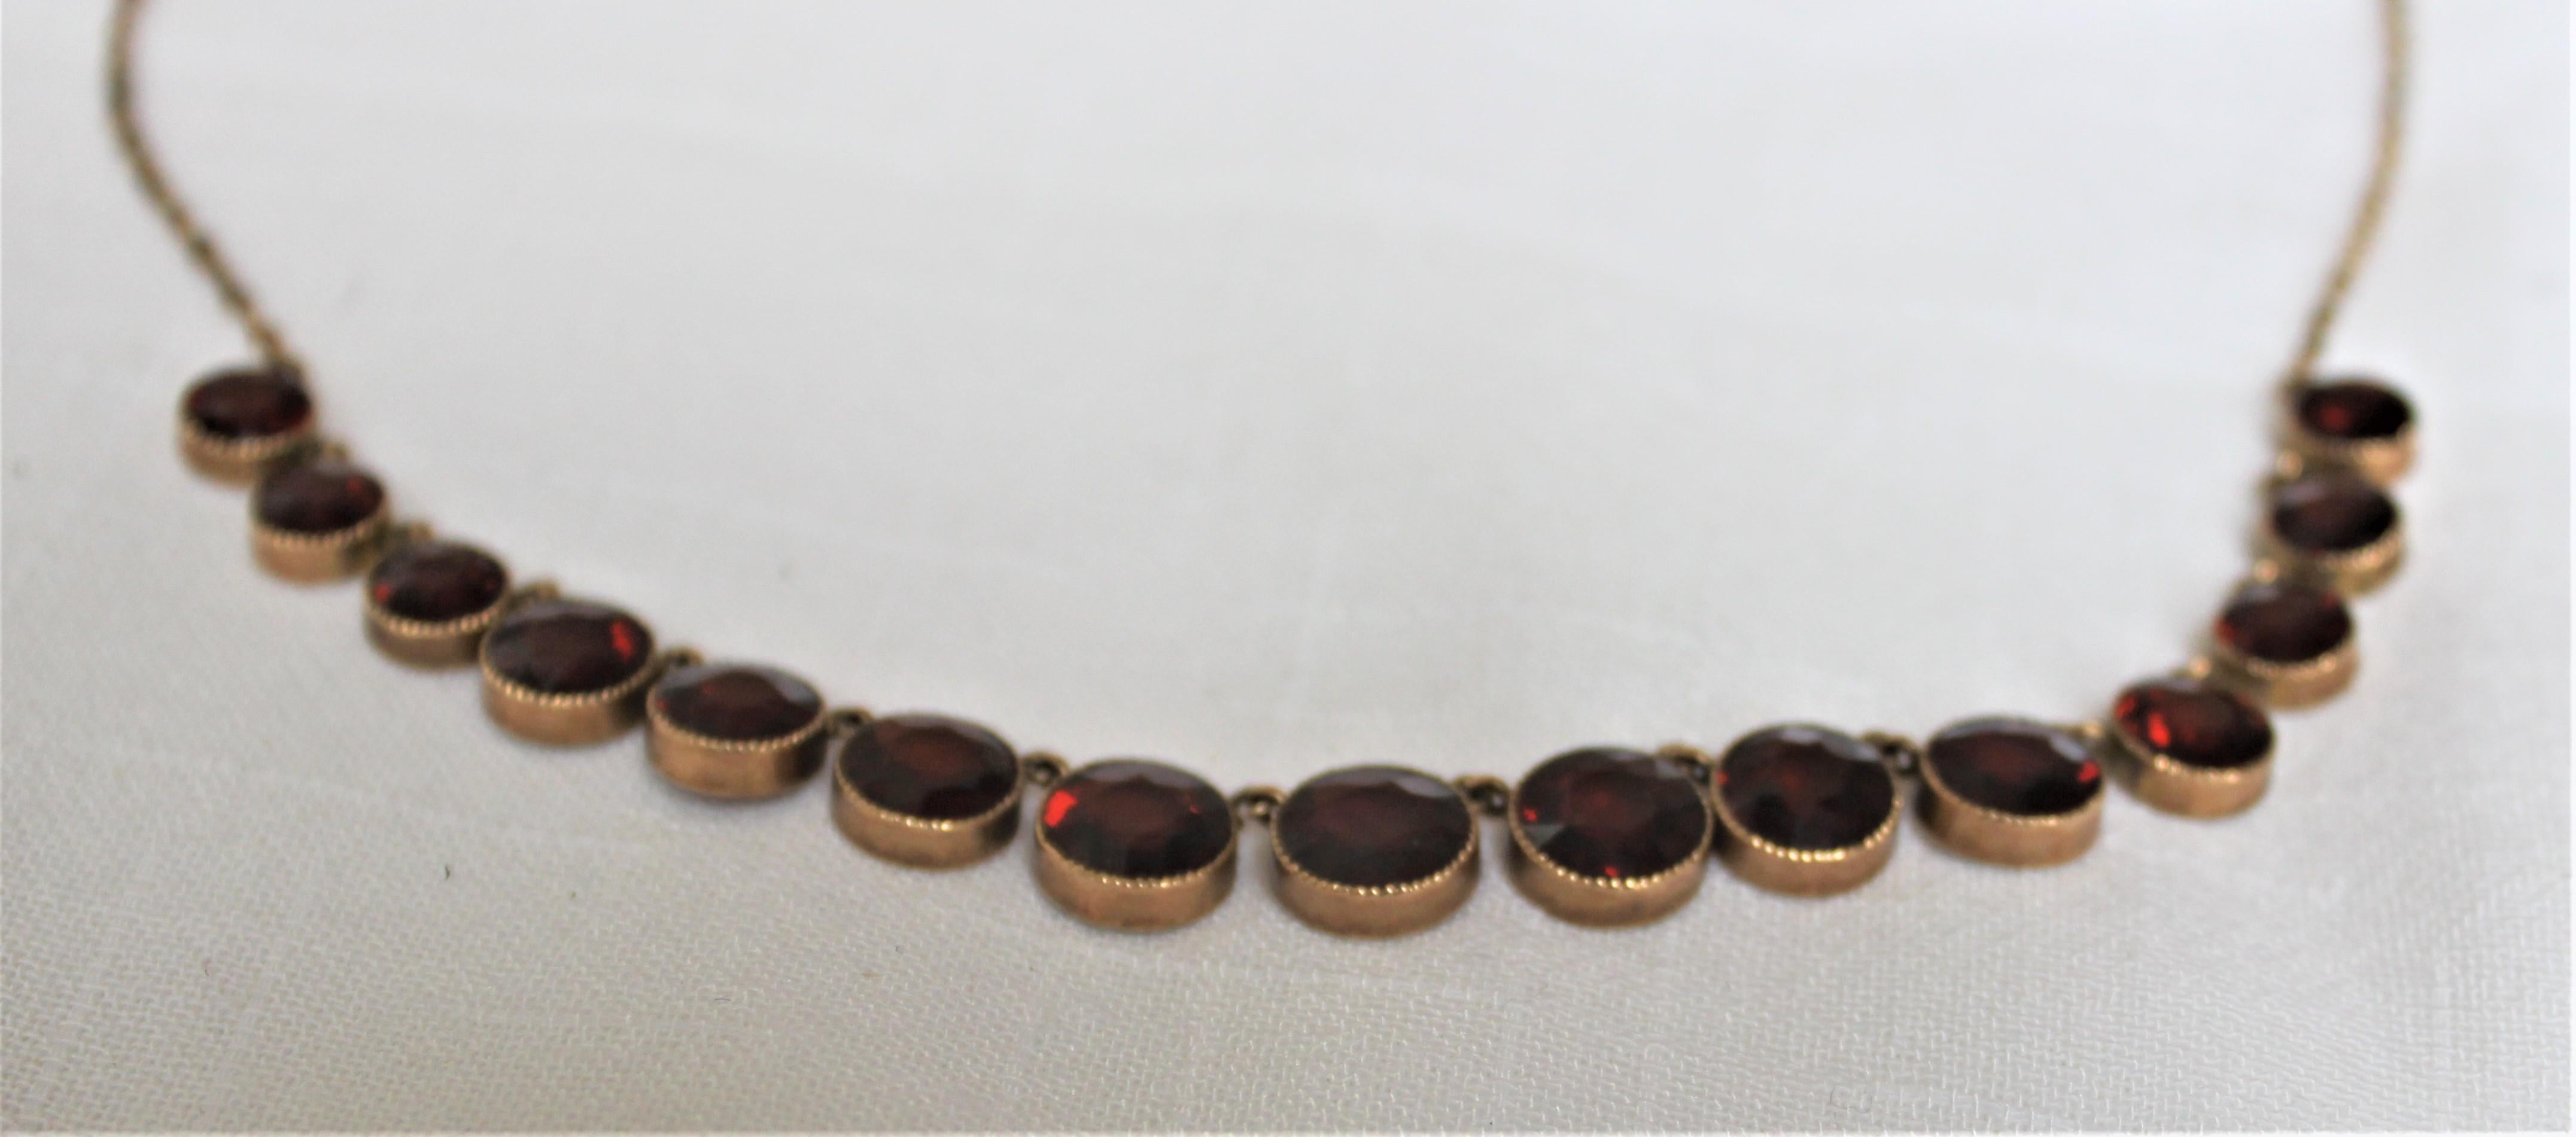 This 10-karat rose gold necklace with deep fine toothed bezel set graduated garnets is completely unsigned, but tests for 10-karat gold and is believed to have been made in the Early 20th century in a modern style. The Bohemian garnets present with